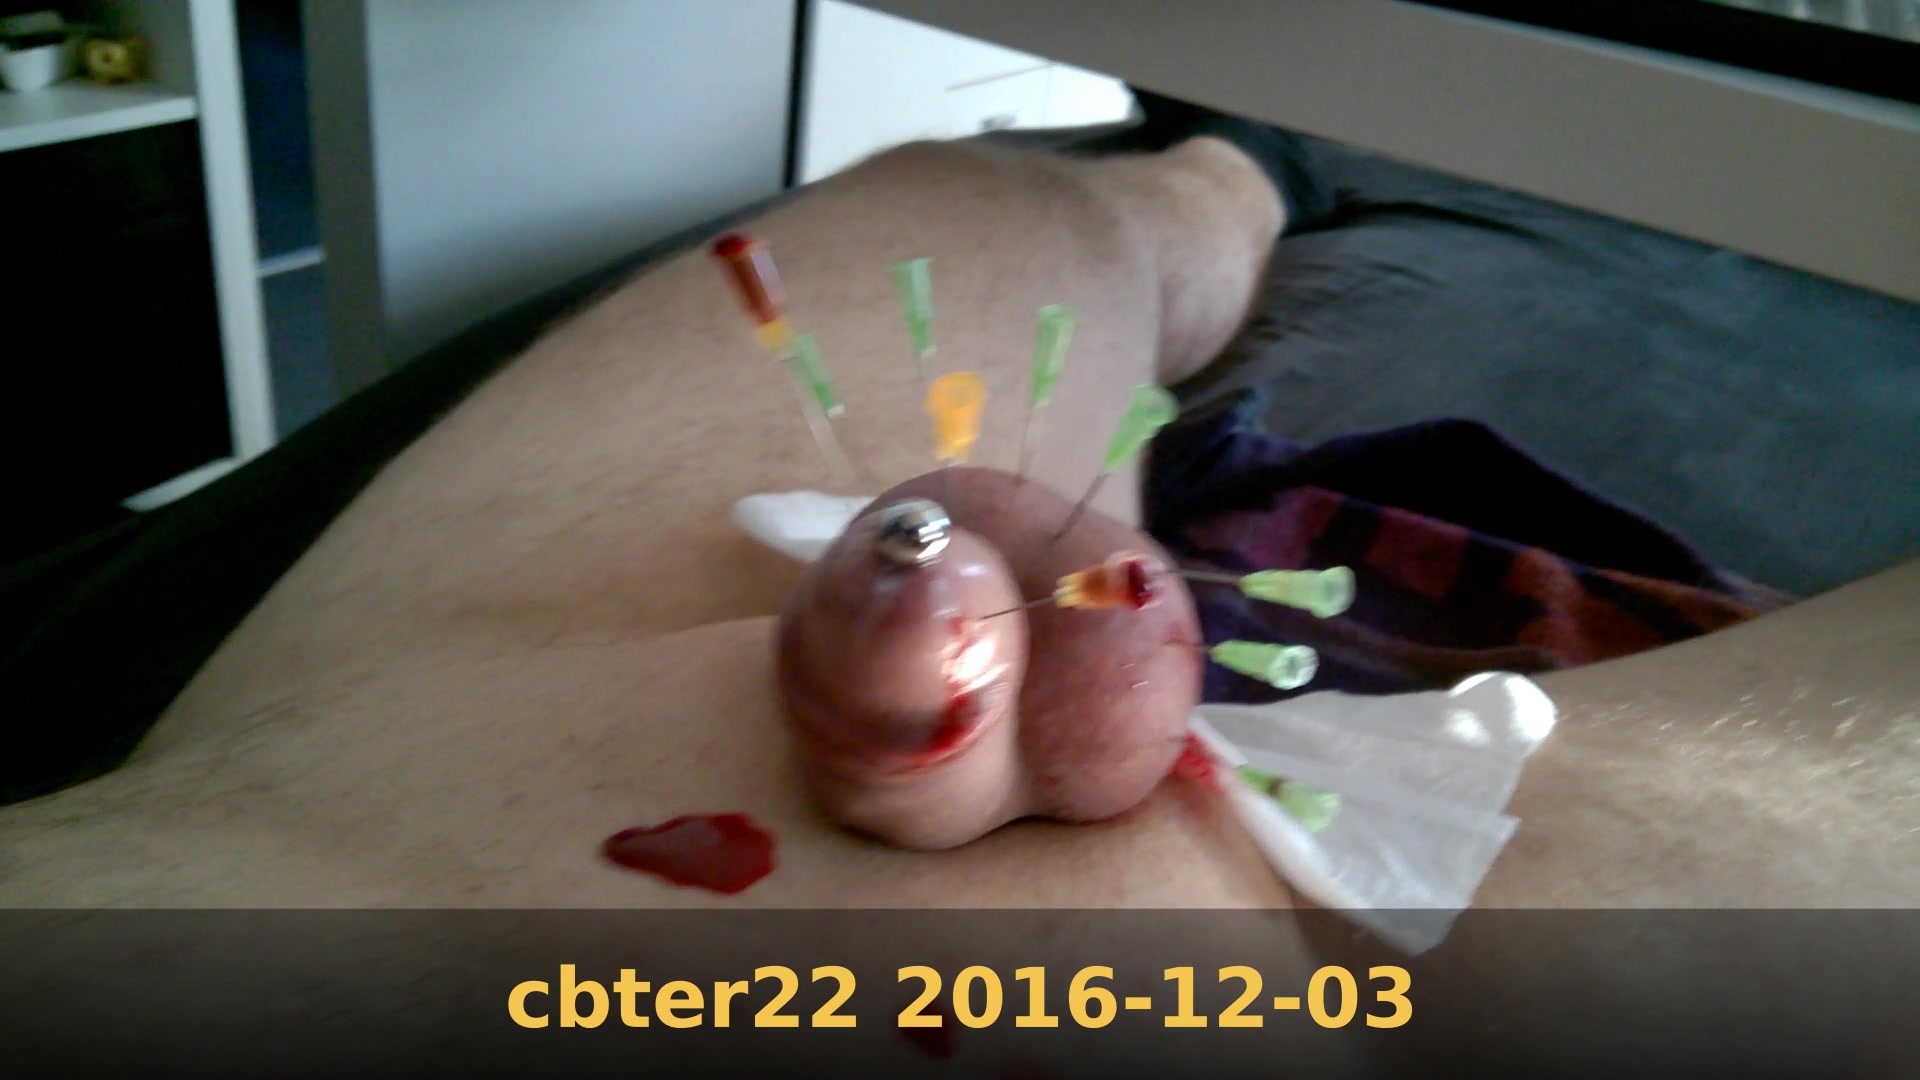 Removing needles on 2016-12-03